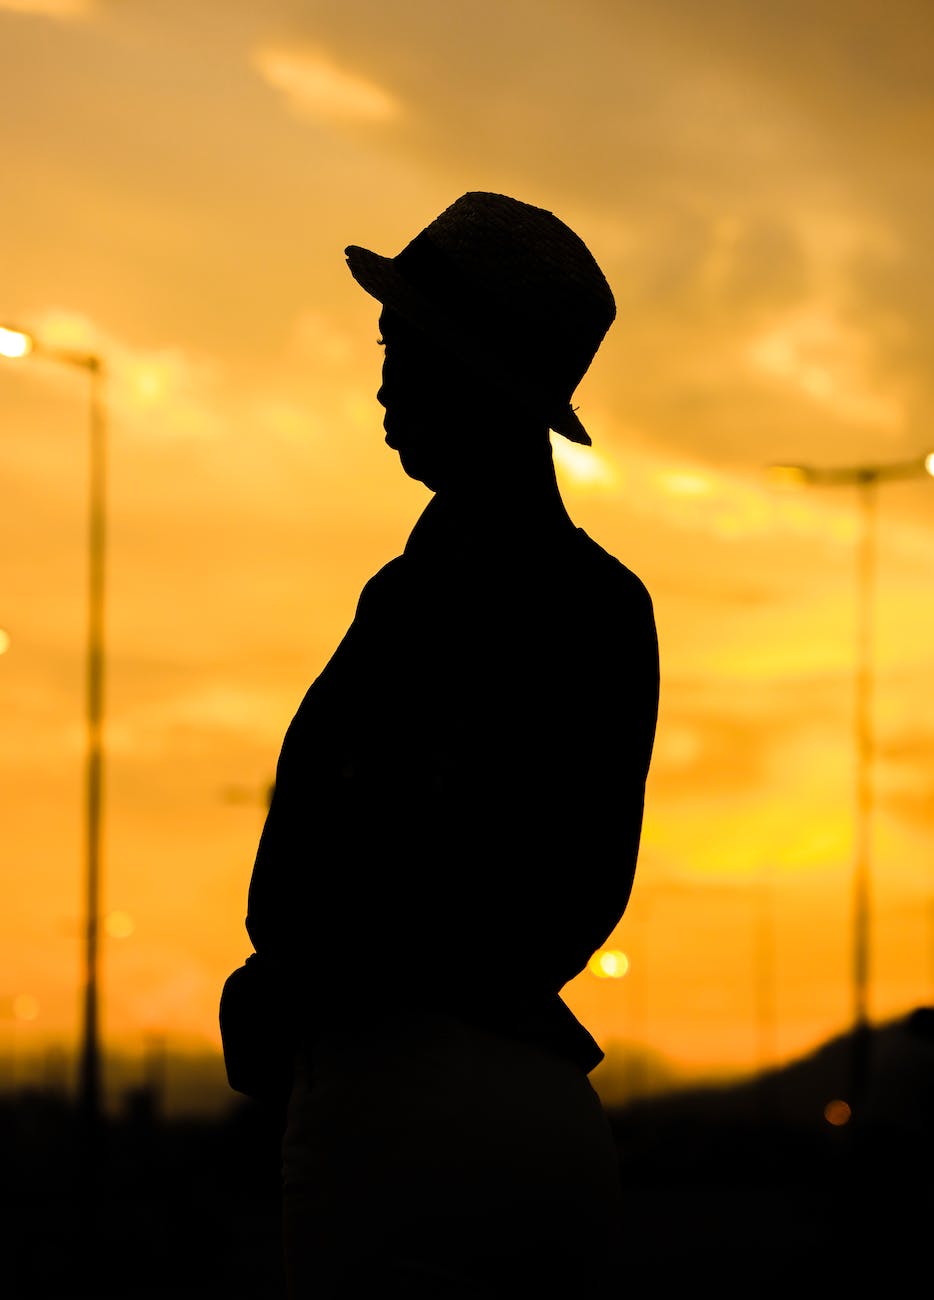 silhouette of a person in a hat against sunset sky